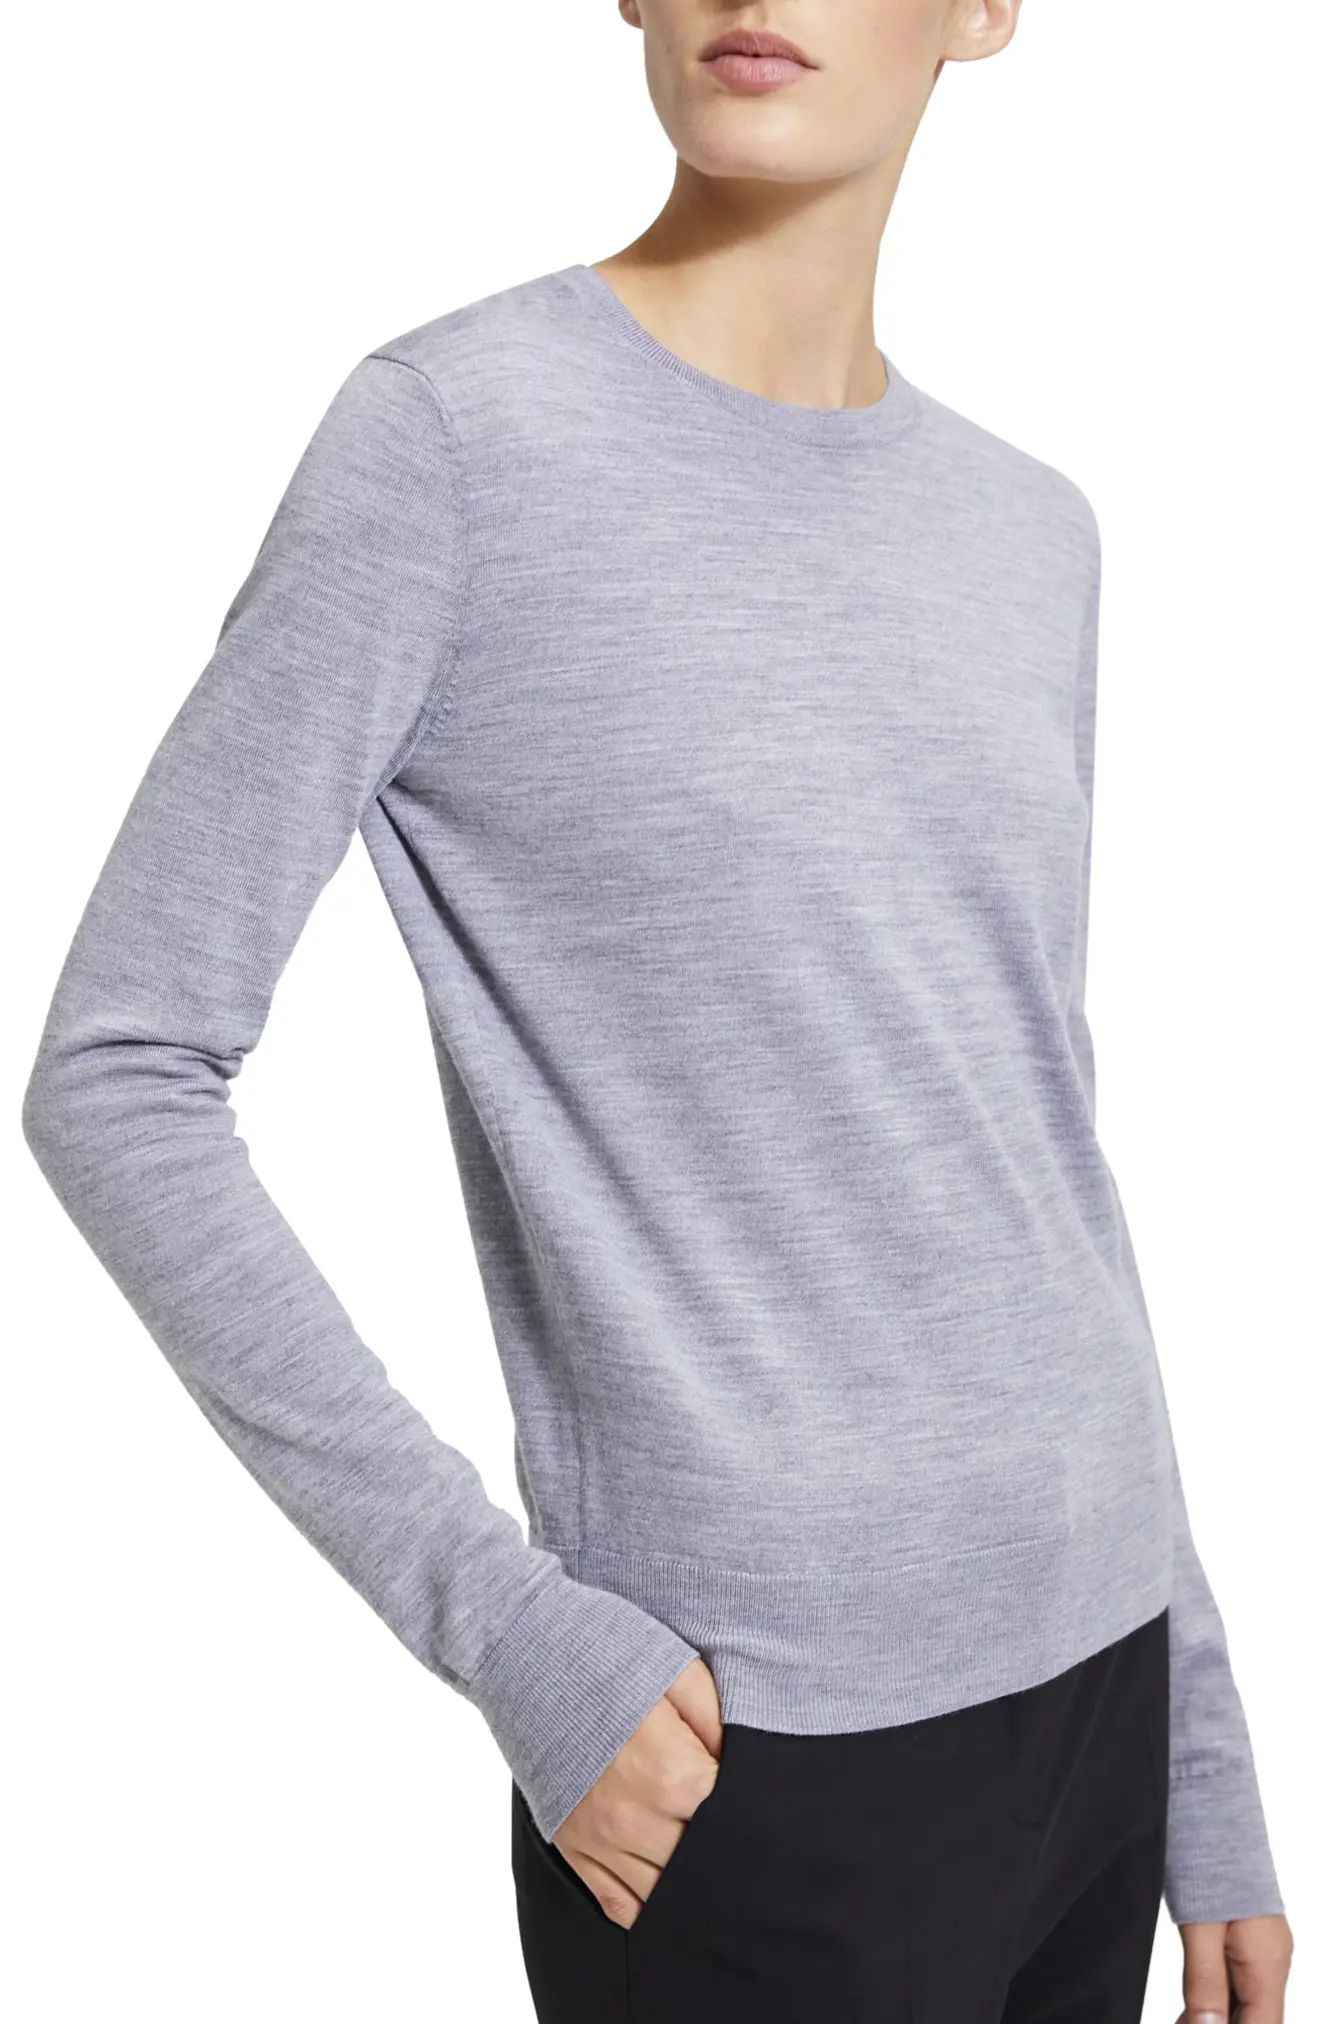 Theory Regal Wool Crewneck Sweater in Cool Heather Grey at Nordstrom, Size X-Large | Nordstrom